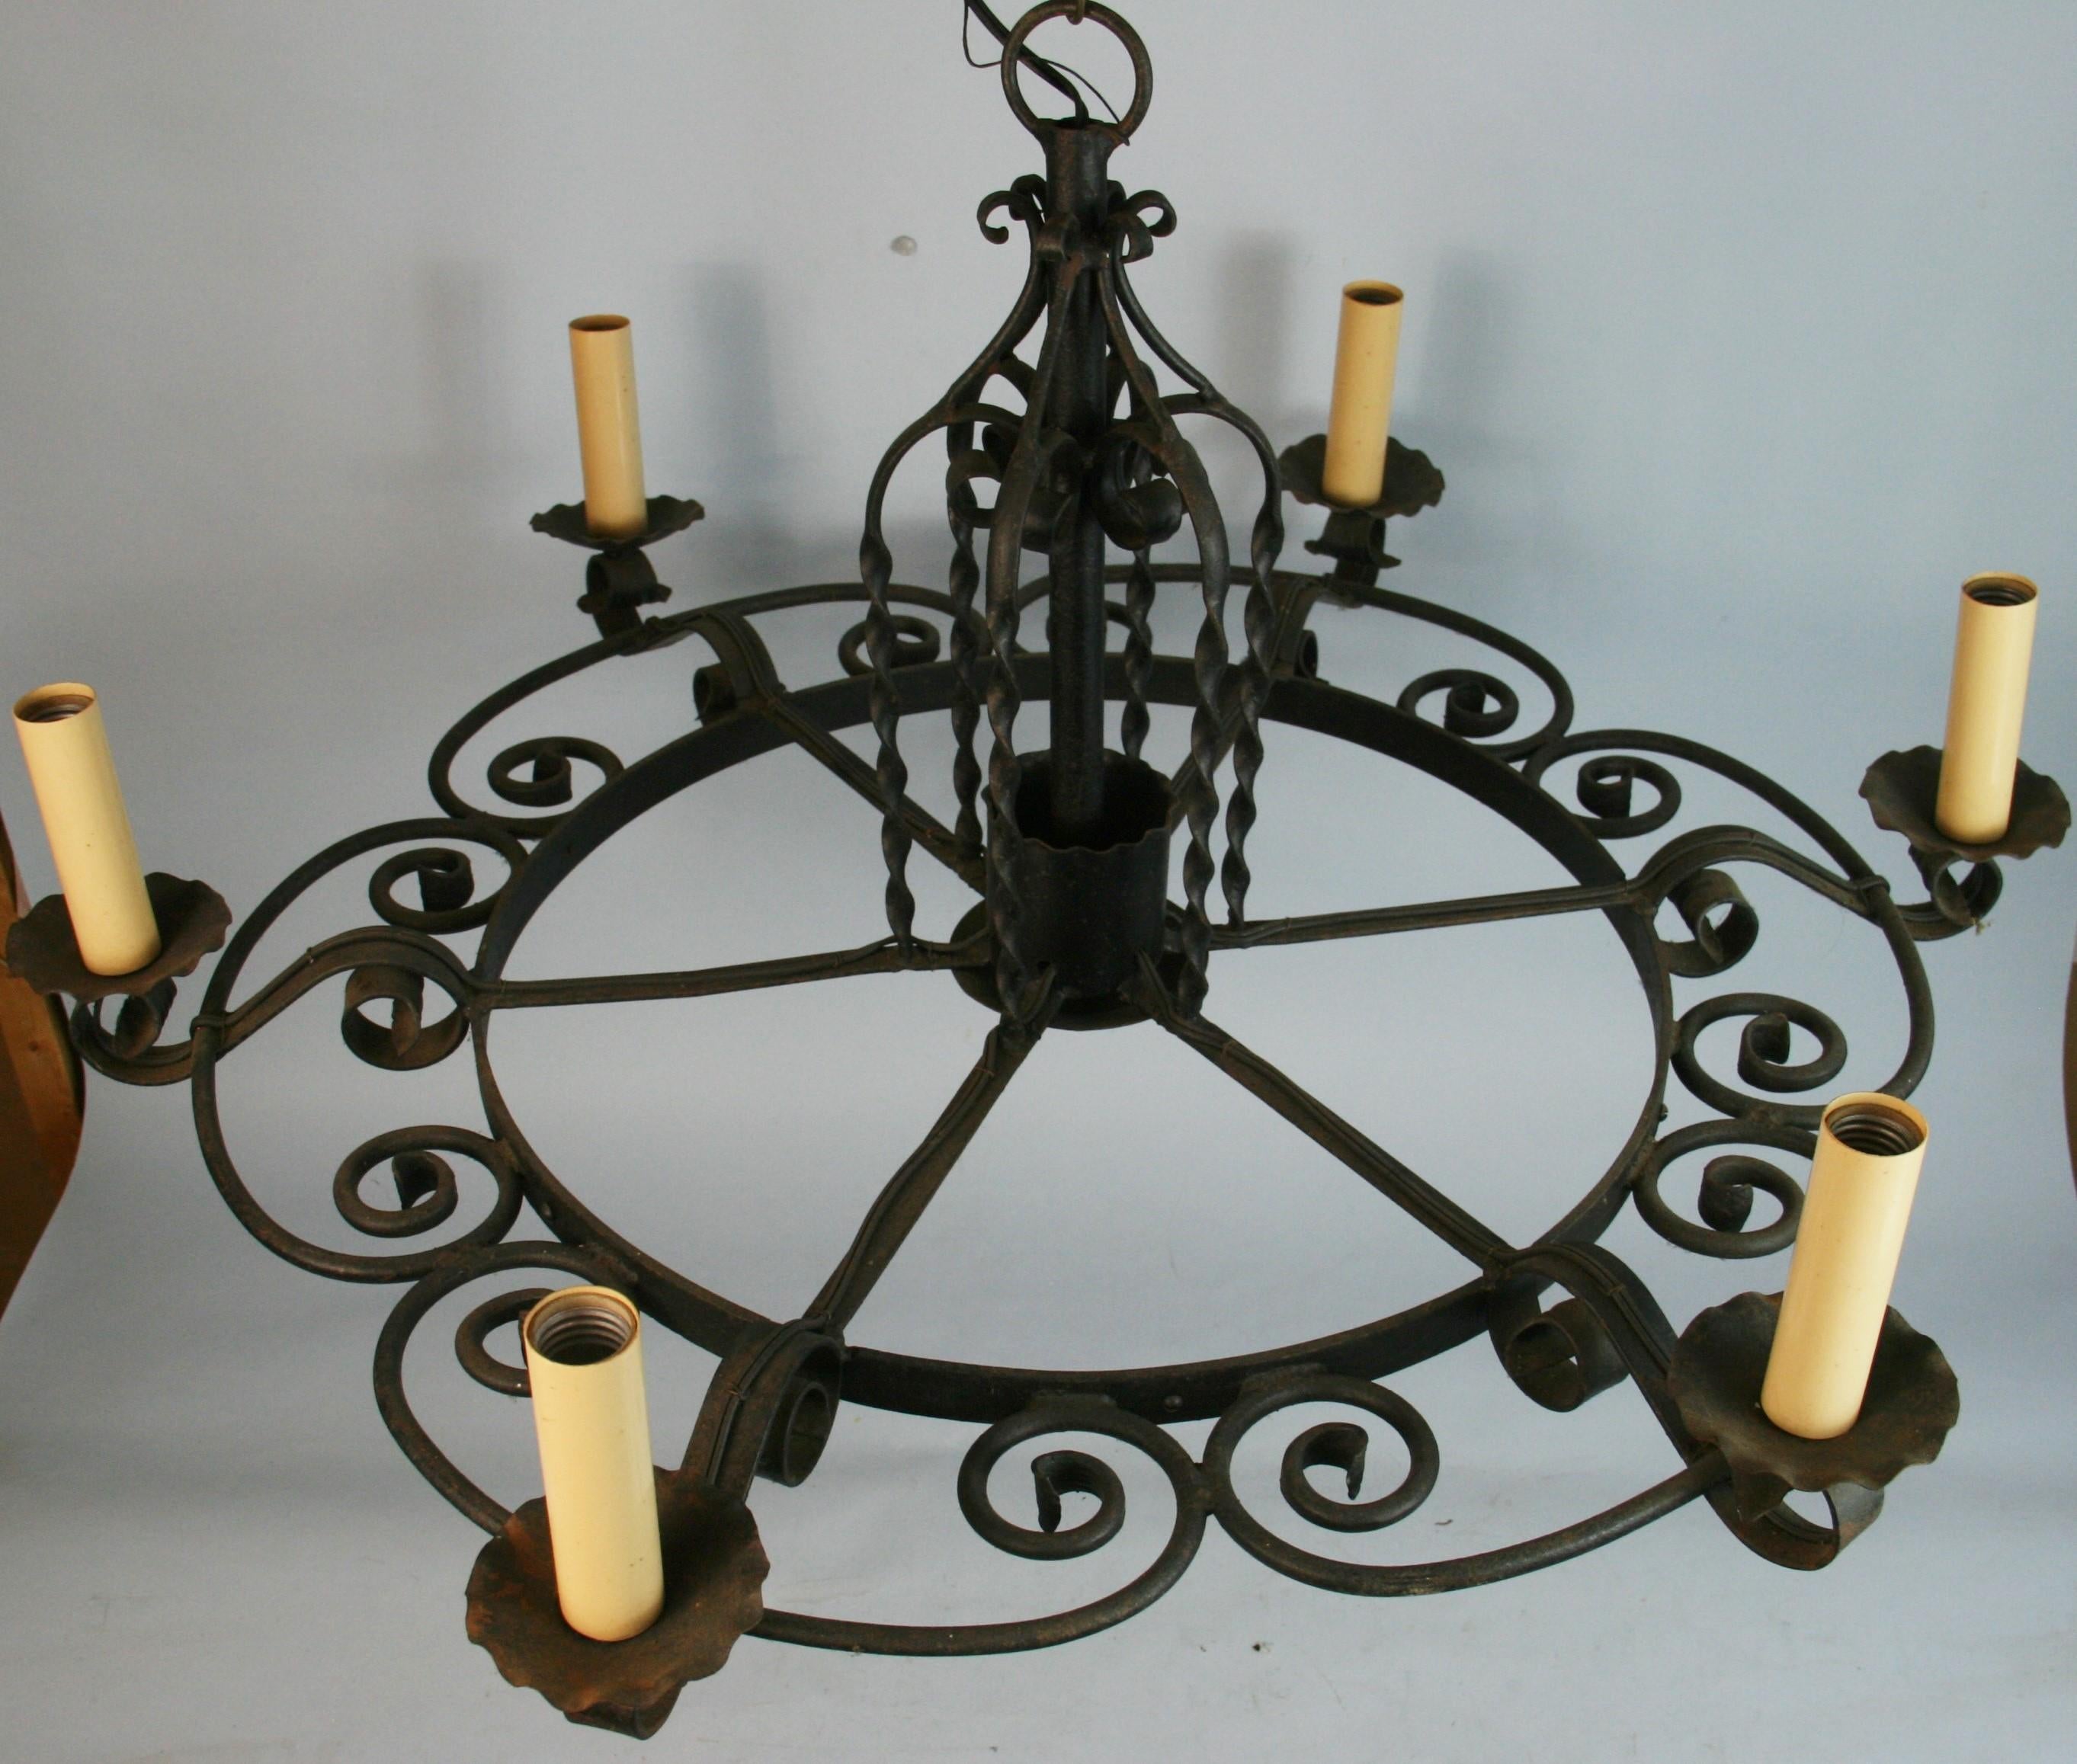 1610 An oversized elegant and rustic all hand forged iron hoop with cage form center stem and scrolled iron work around the hoop.
Rewired 
Takes 60 watt Edison based bulbs
  